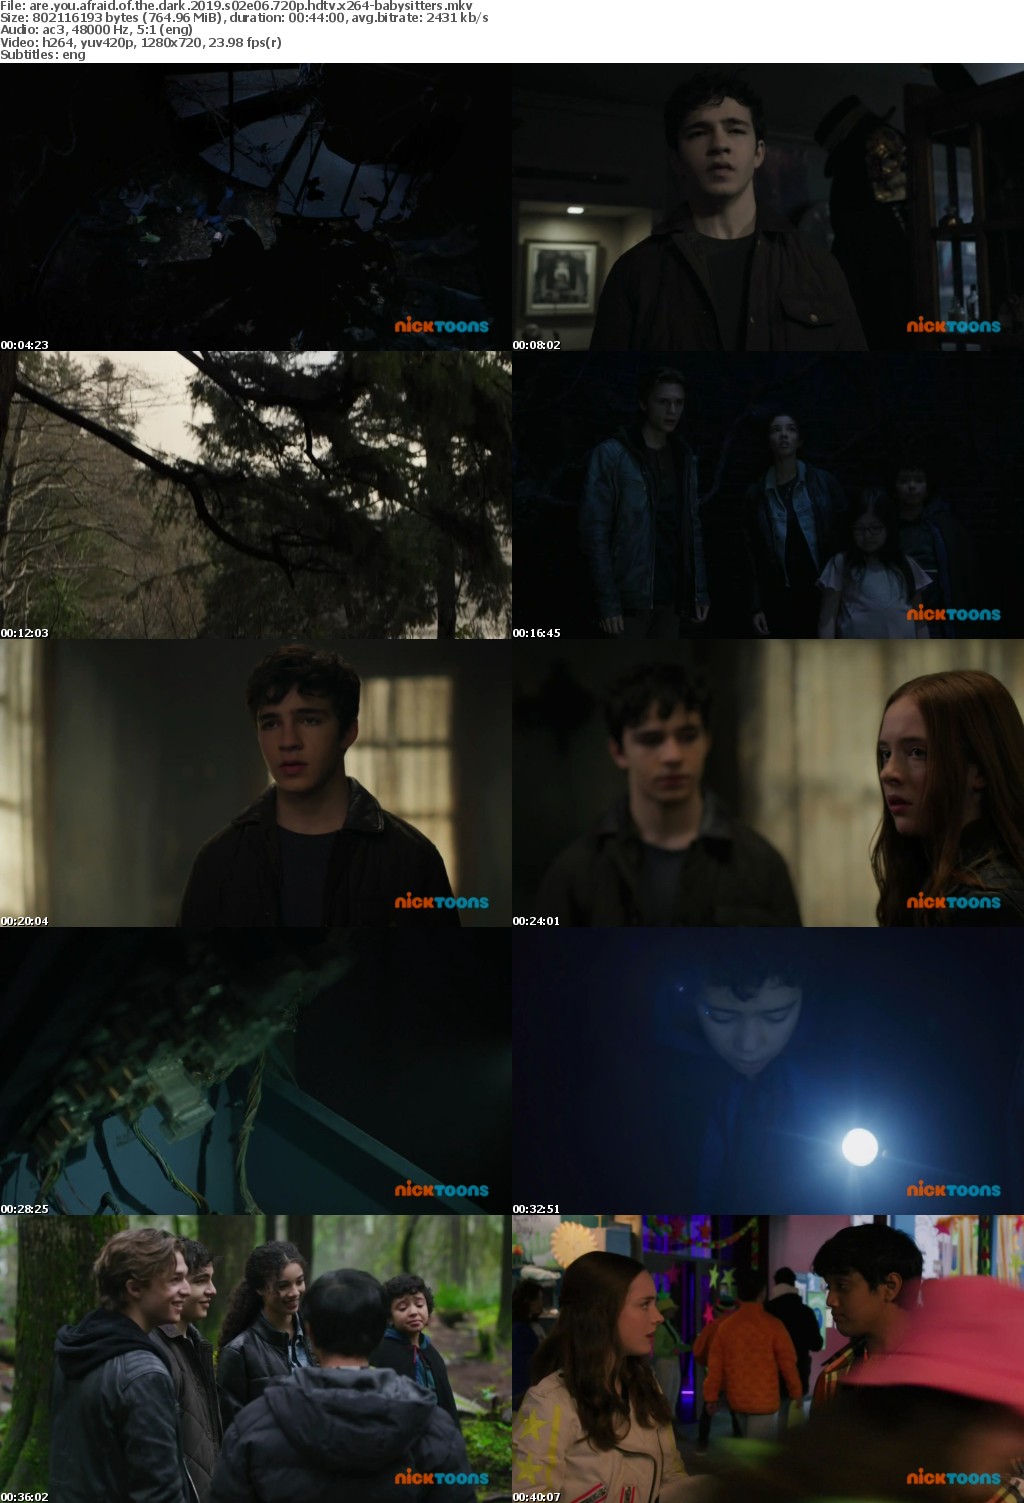 Are You Afraid of the Dark 2019 S02E06 720p HDTV x264-BABYSITTERS